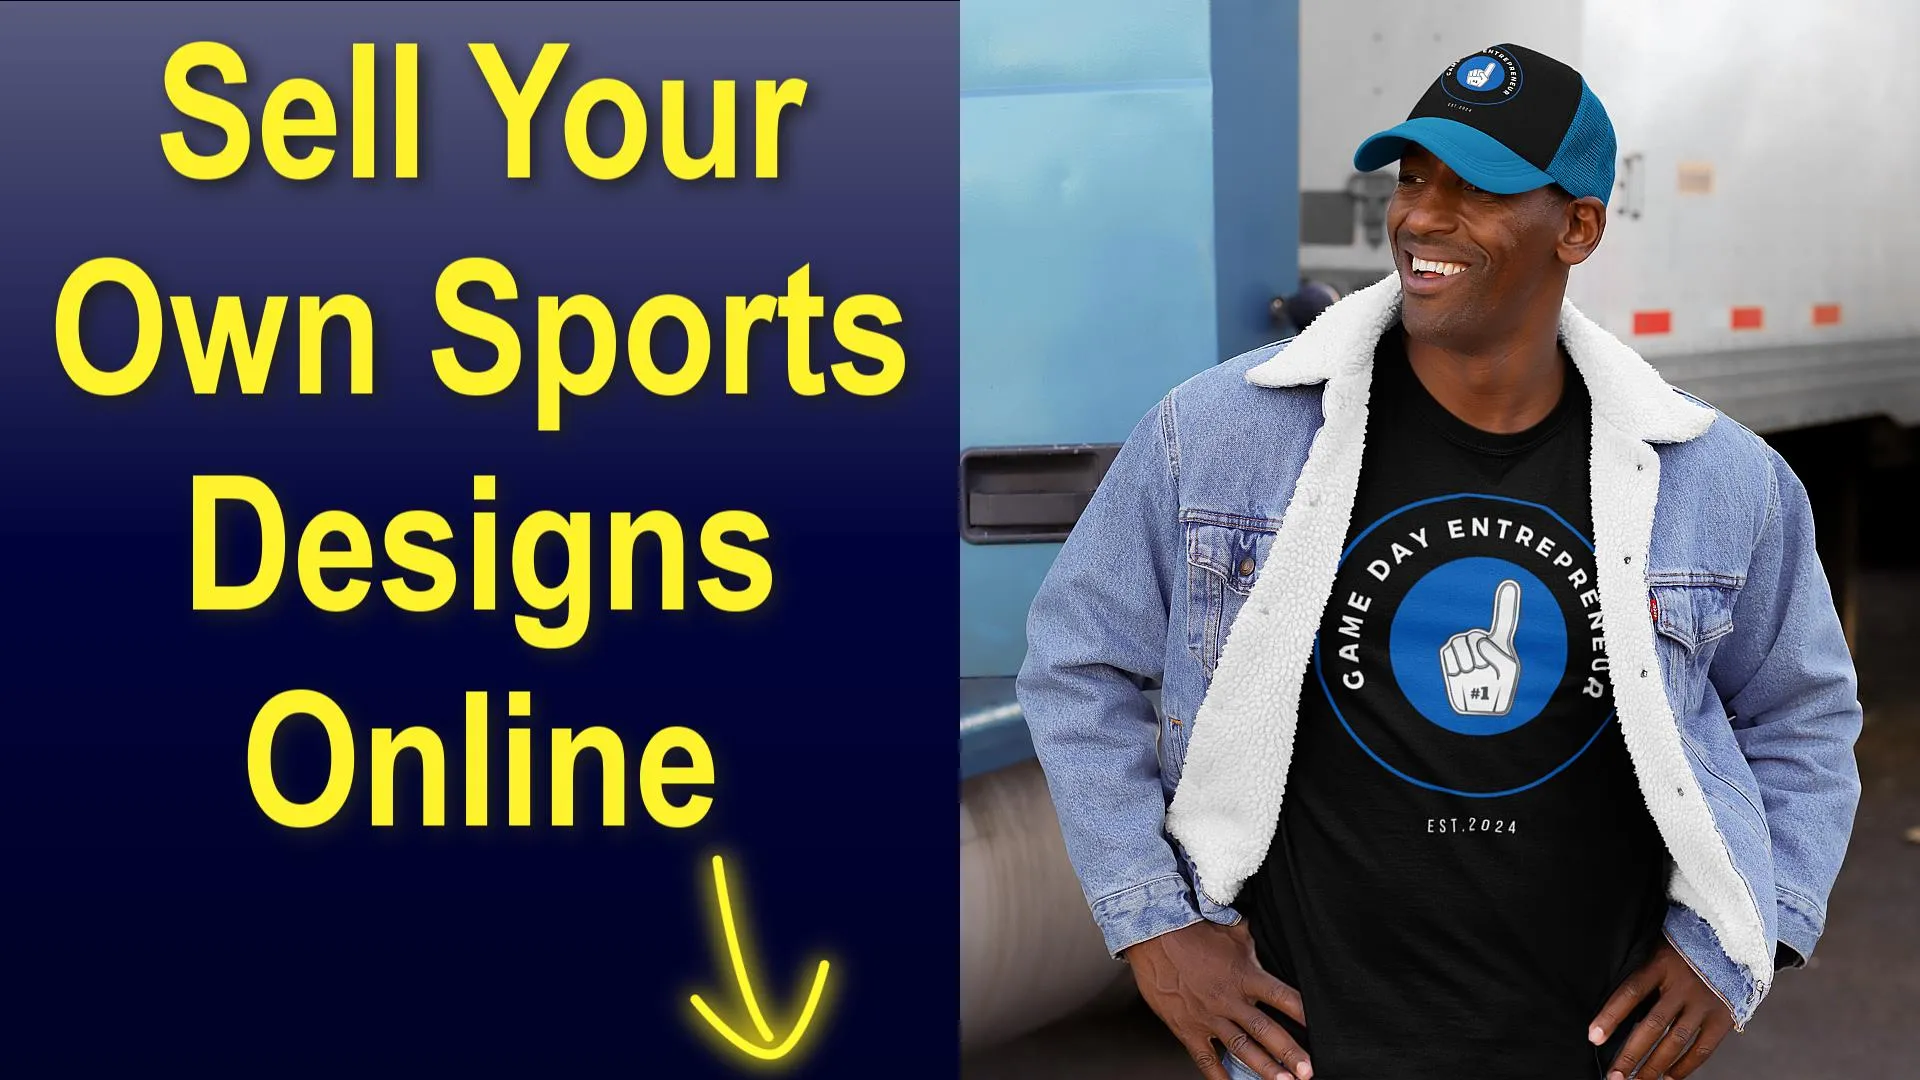 Sell Your Own Sports Designs Online